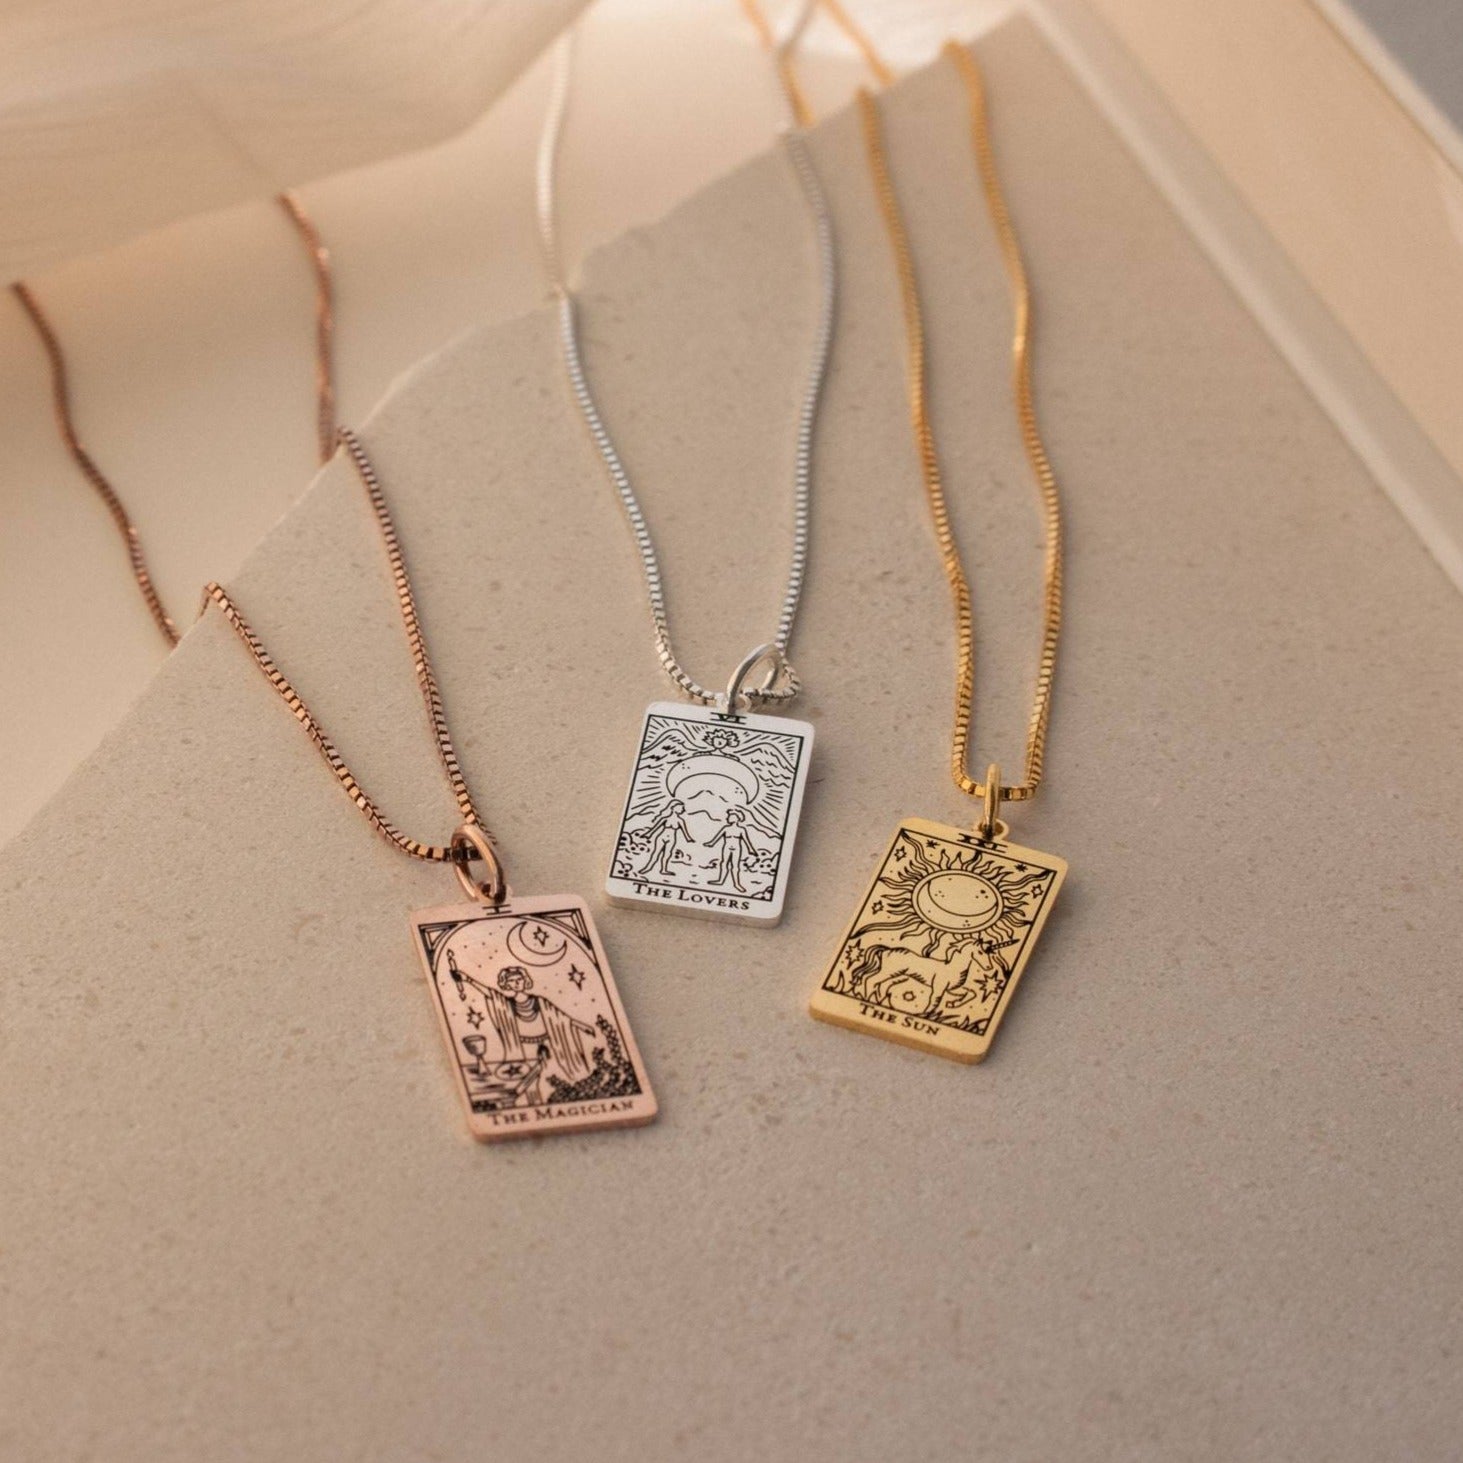 Eight of Rings Tarot Card Necklace - Gold